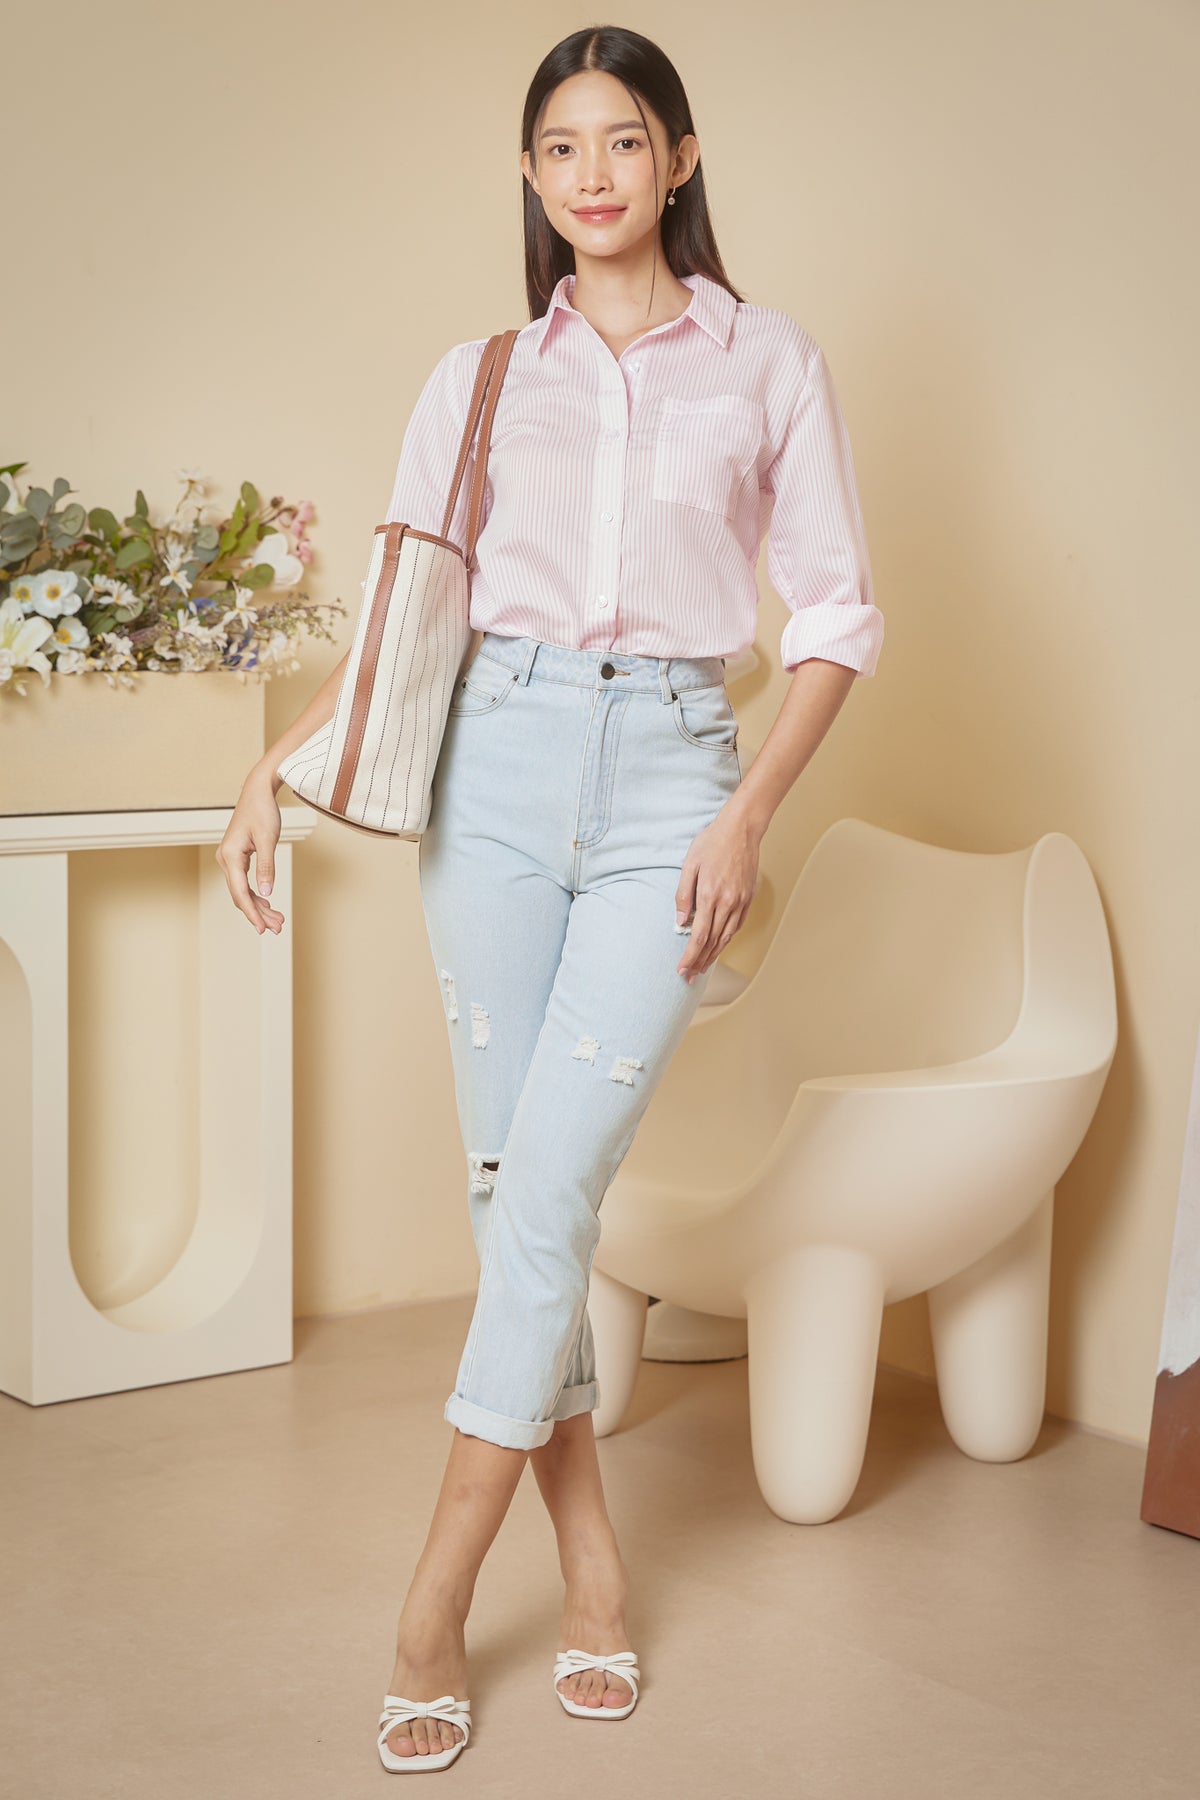 Luca Striped Shirt in Pink